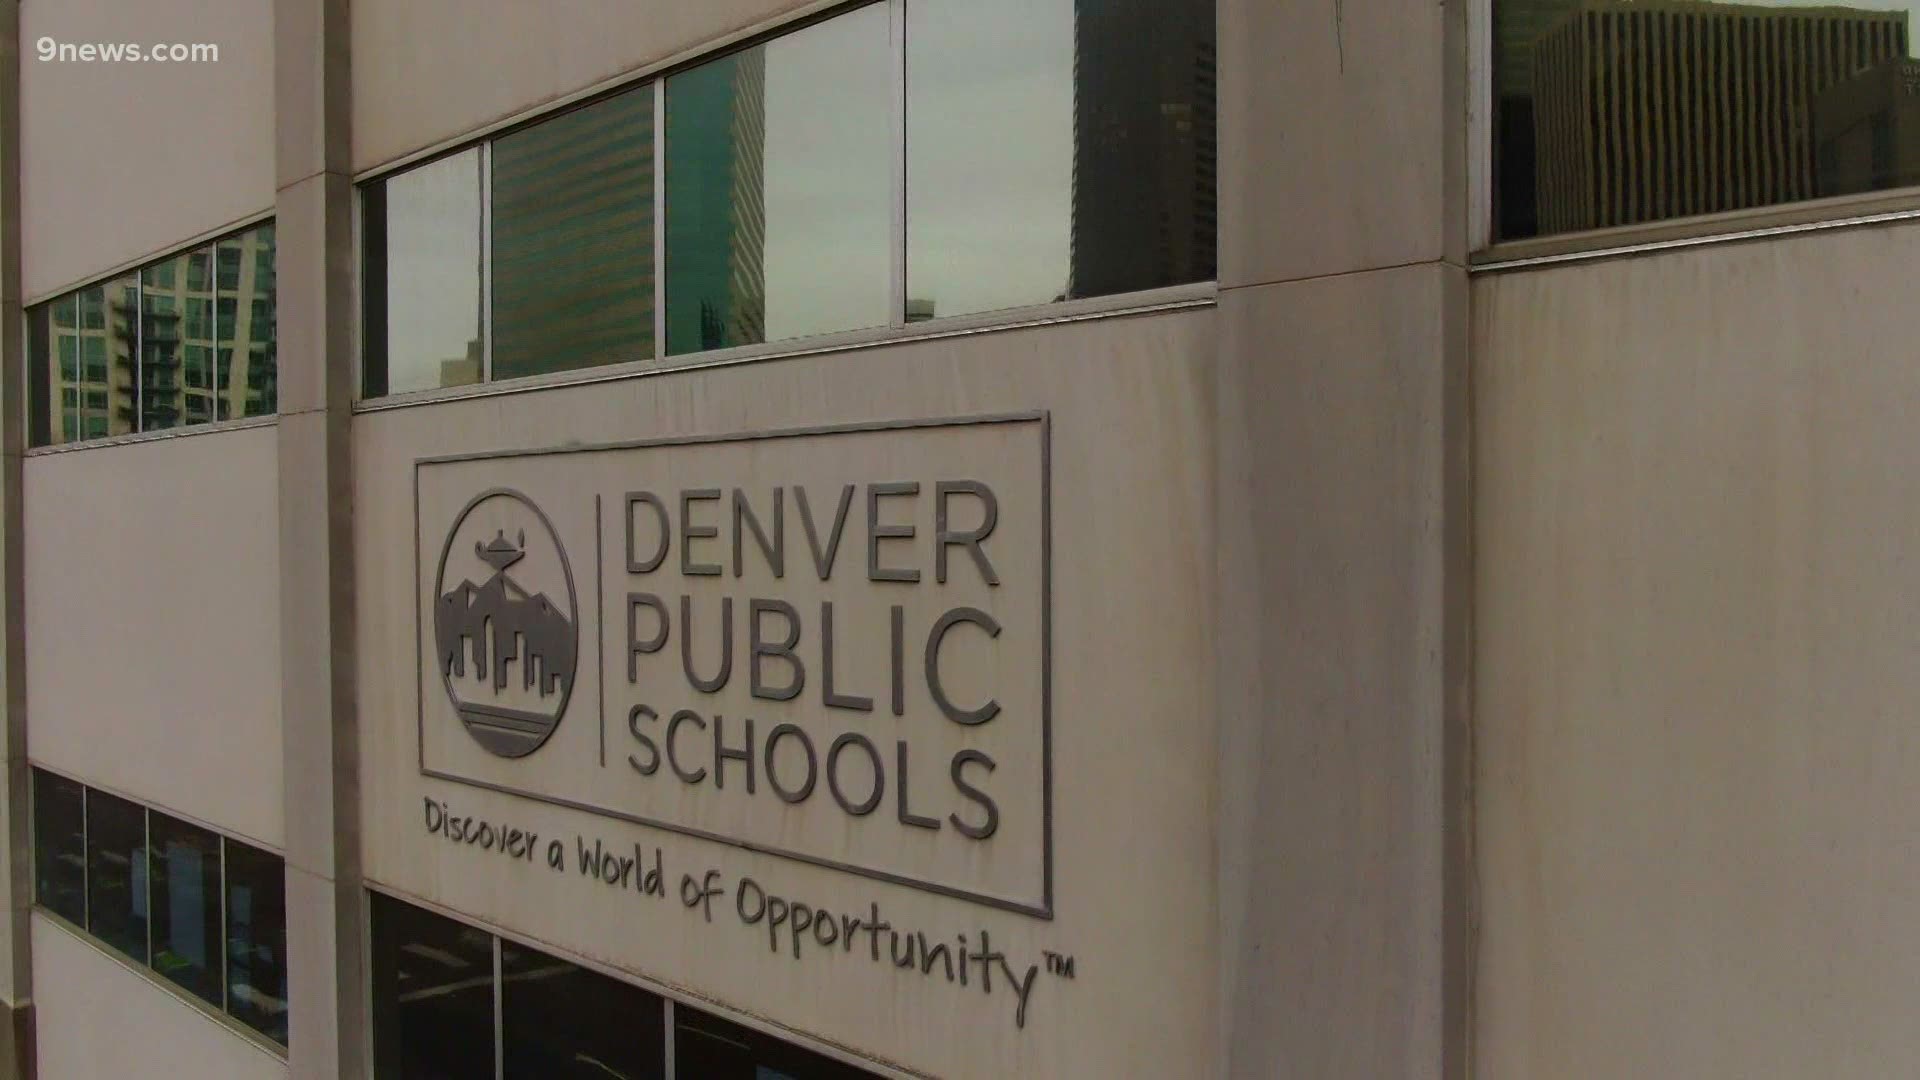 Early-childhood education through fifth grade students in Denver Public School are returning to in-person learning on Jan. 11.